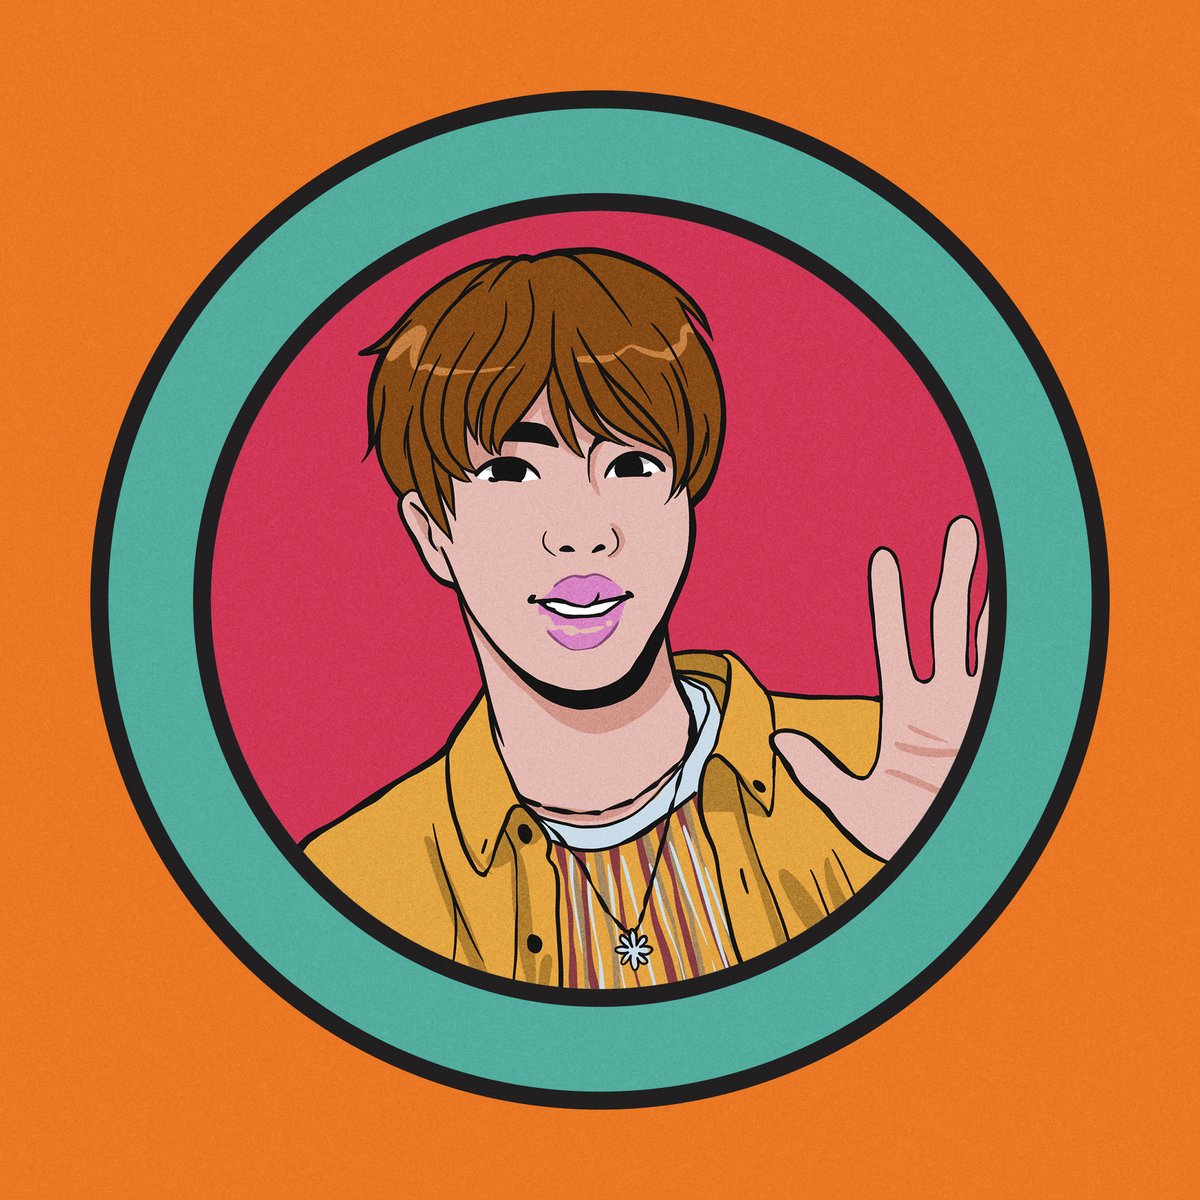 Gonna make this a thread with the illos if you're intersted to see! For the BTS member icon stickers, I drew them in  @Procreate the brush I used is the STUDIO PEN. I also used clipping masks & alpha lock. To get accurate skin tones I looked @ a lot of photos & color dropped